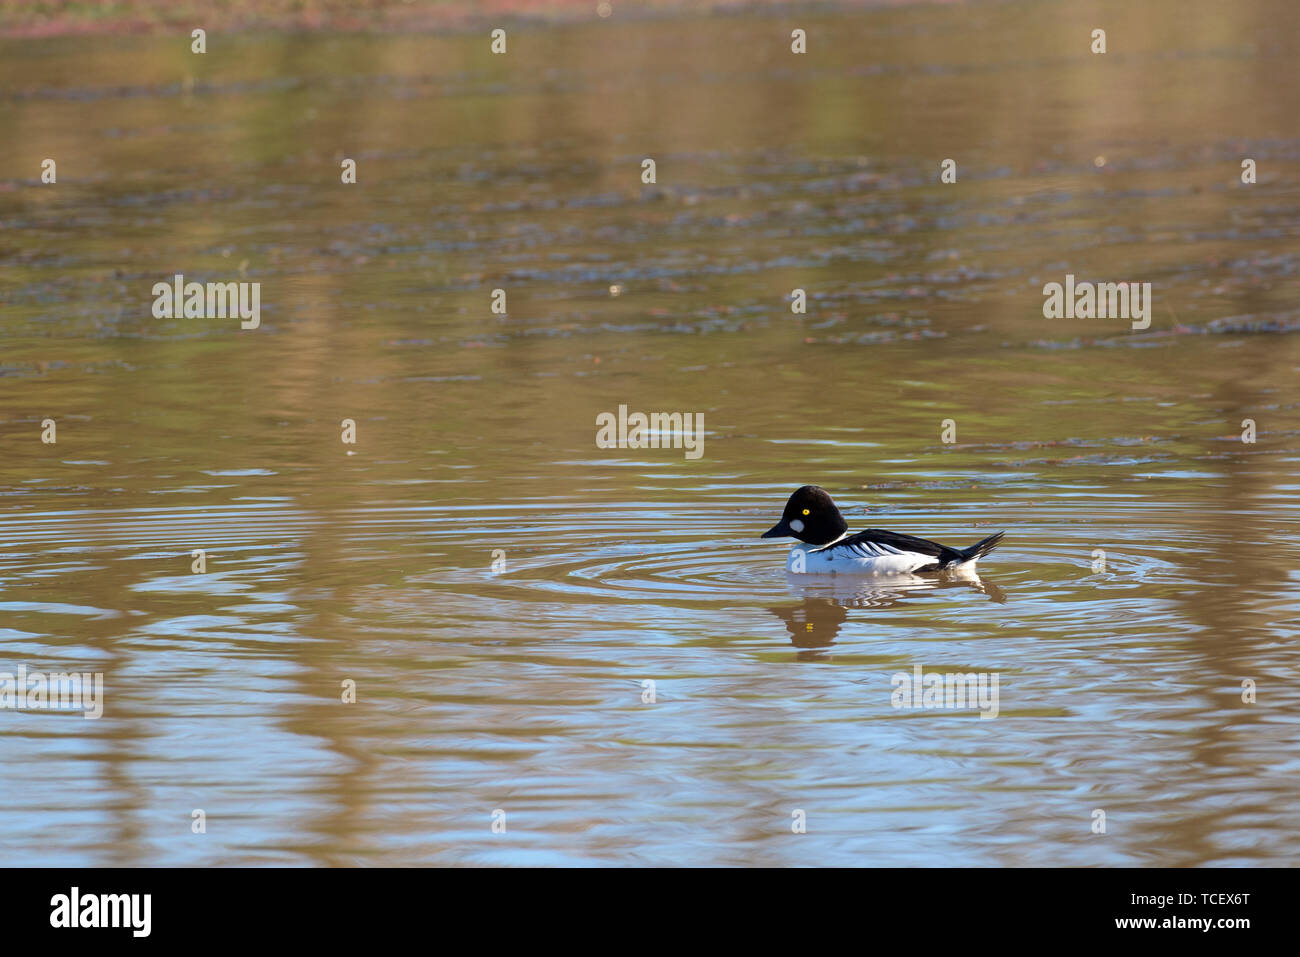 Side view of black and white garrot floating in brown rippling water Stock Photo